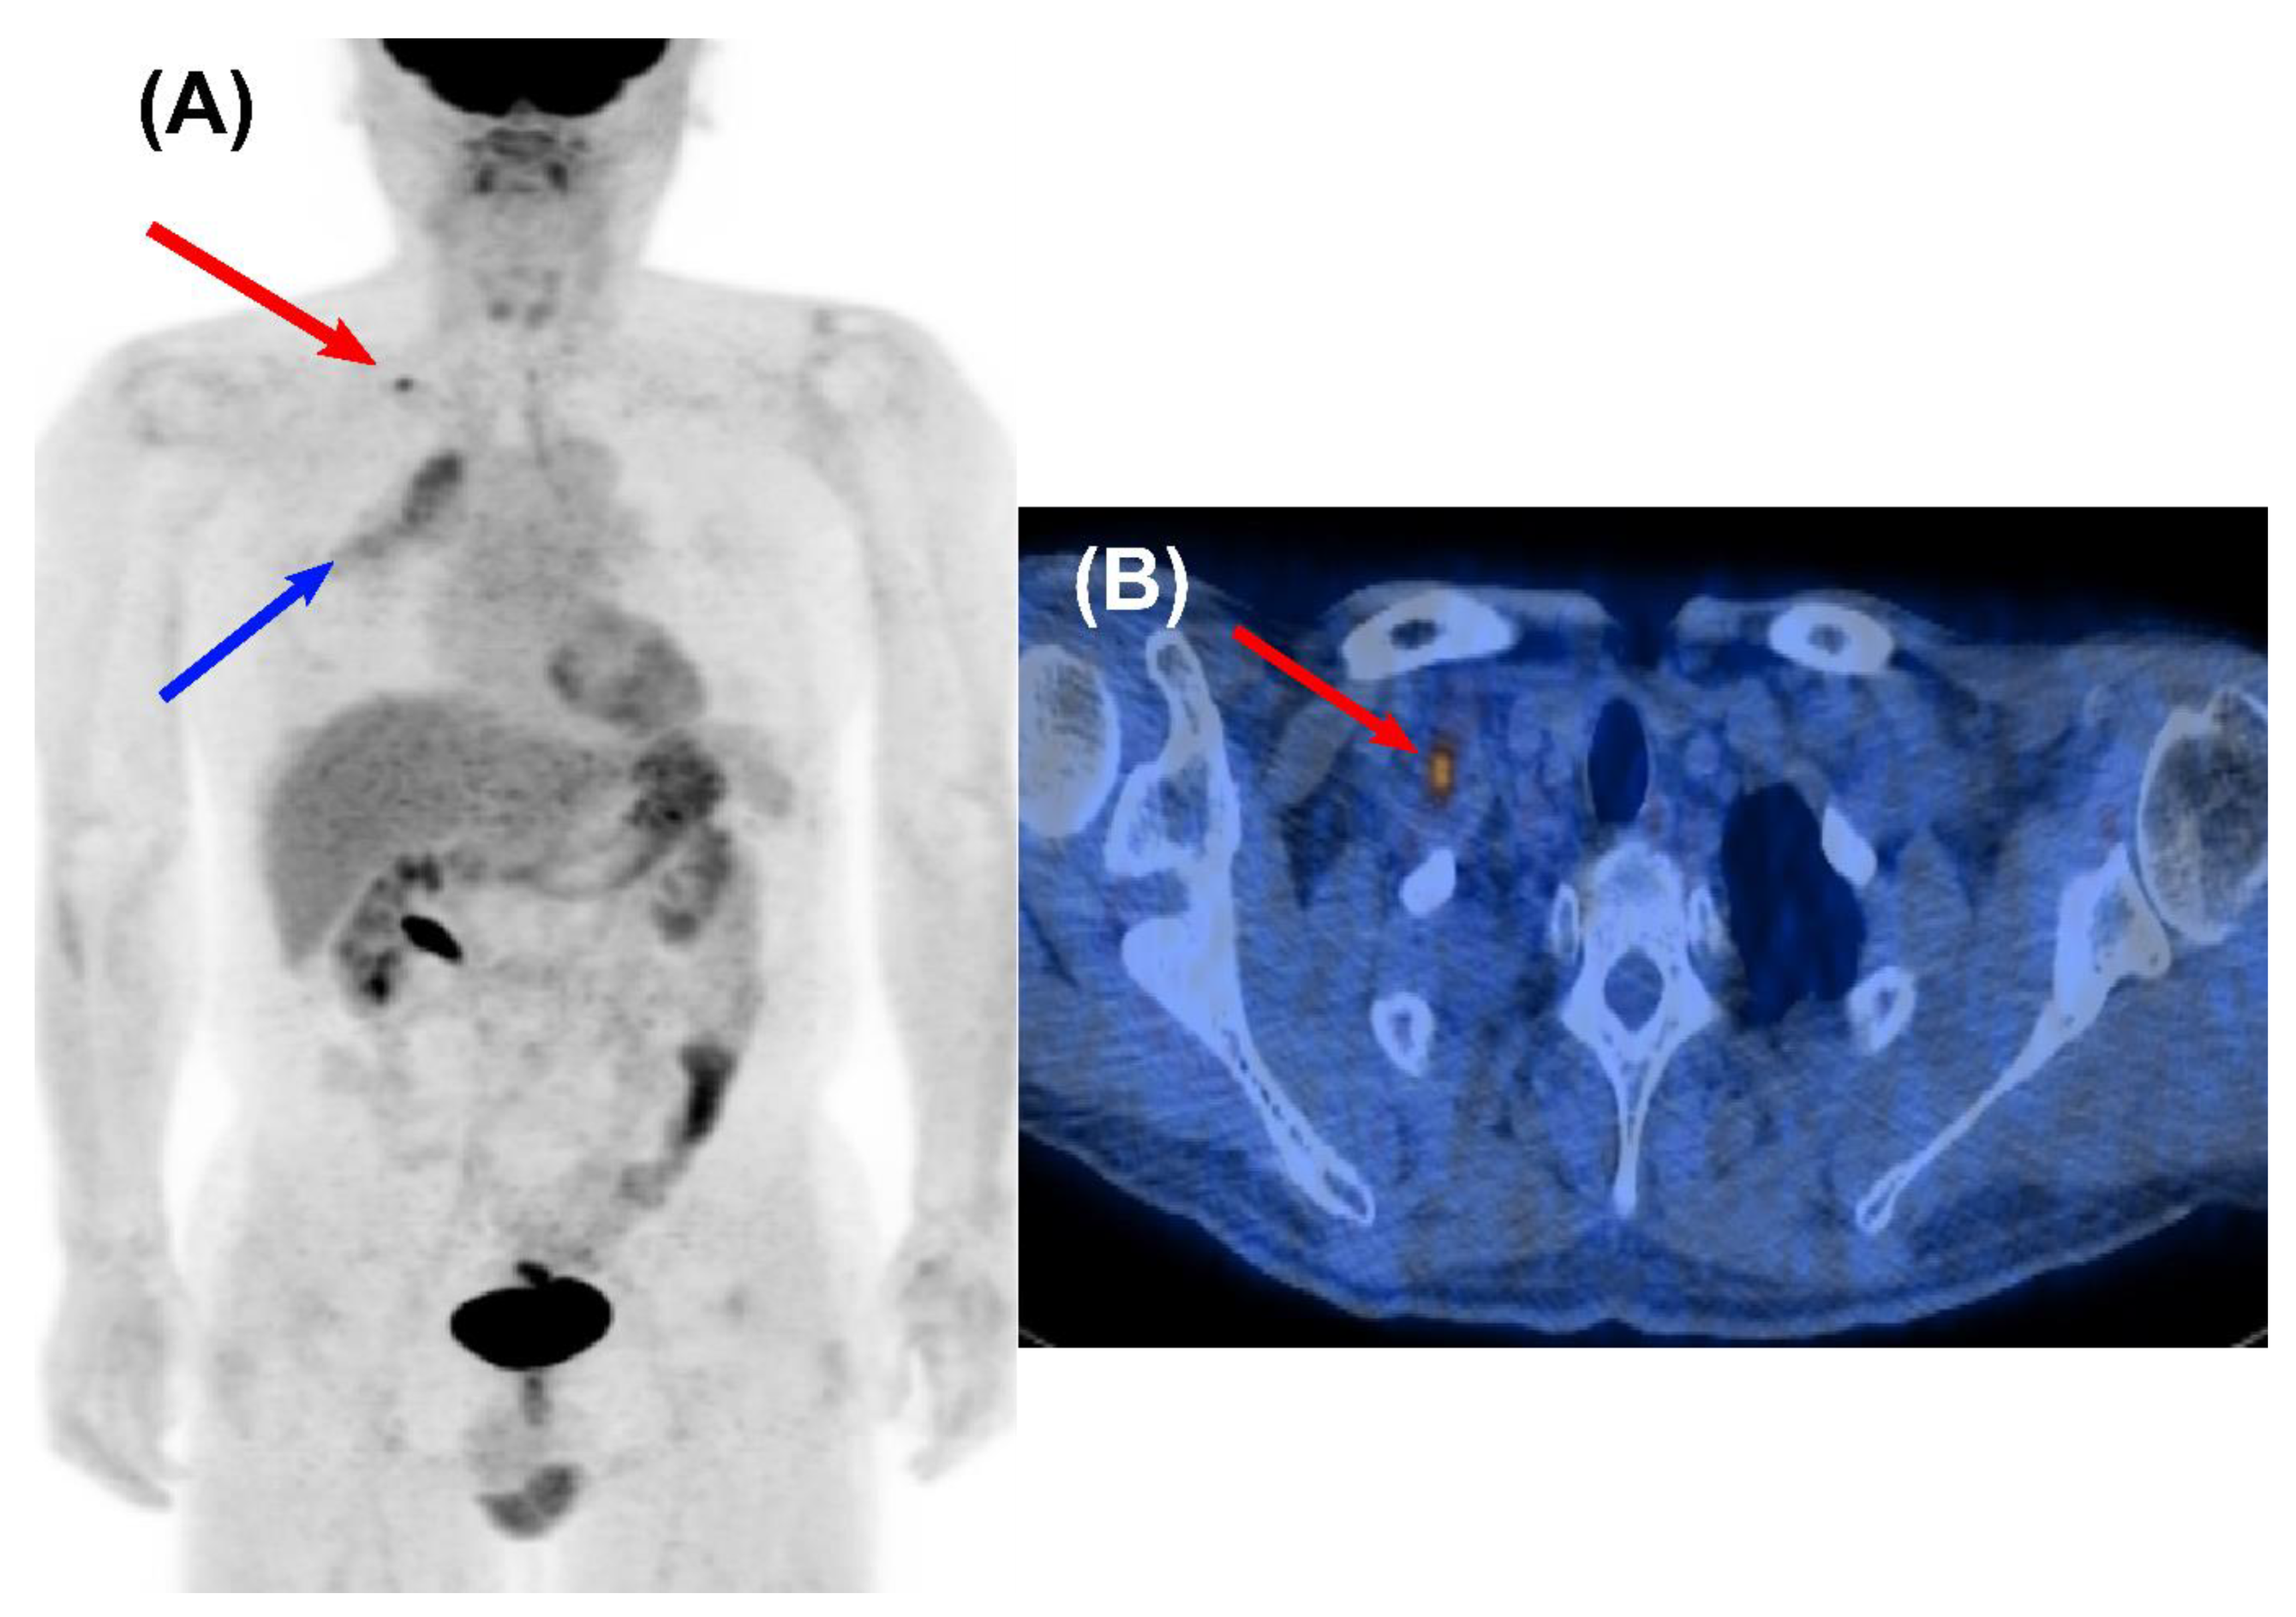 Cancers | Free Full-Text | Clinical Value of Surveillance  18F-fluorodeoxyglucose PET/CT for Detecting Unsuspected Recurrence or  Second Primary Cancer in Non-Small Cell Lung Cancer after Curative Therapy  | HTML